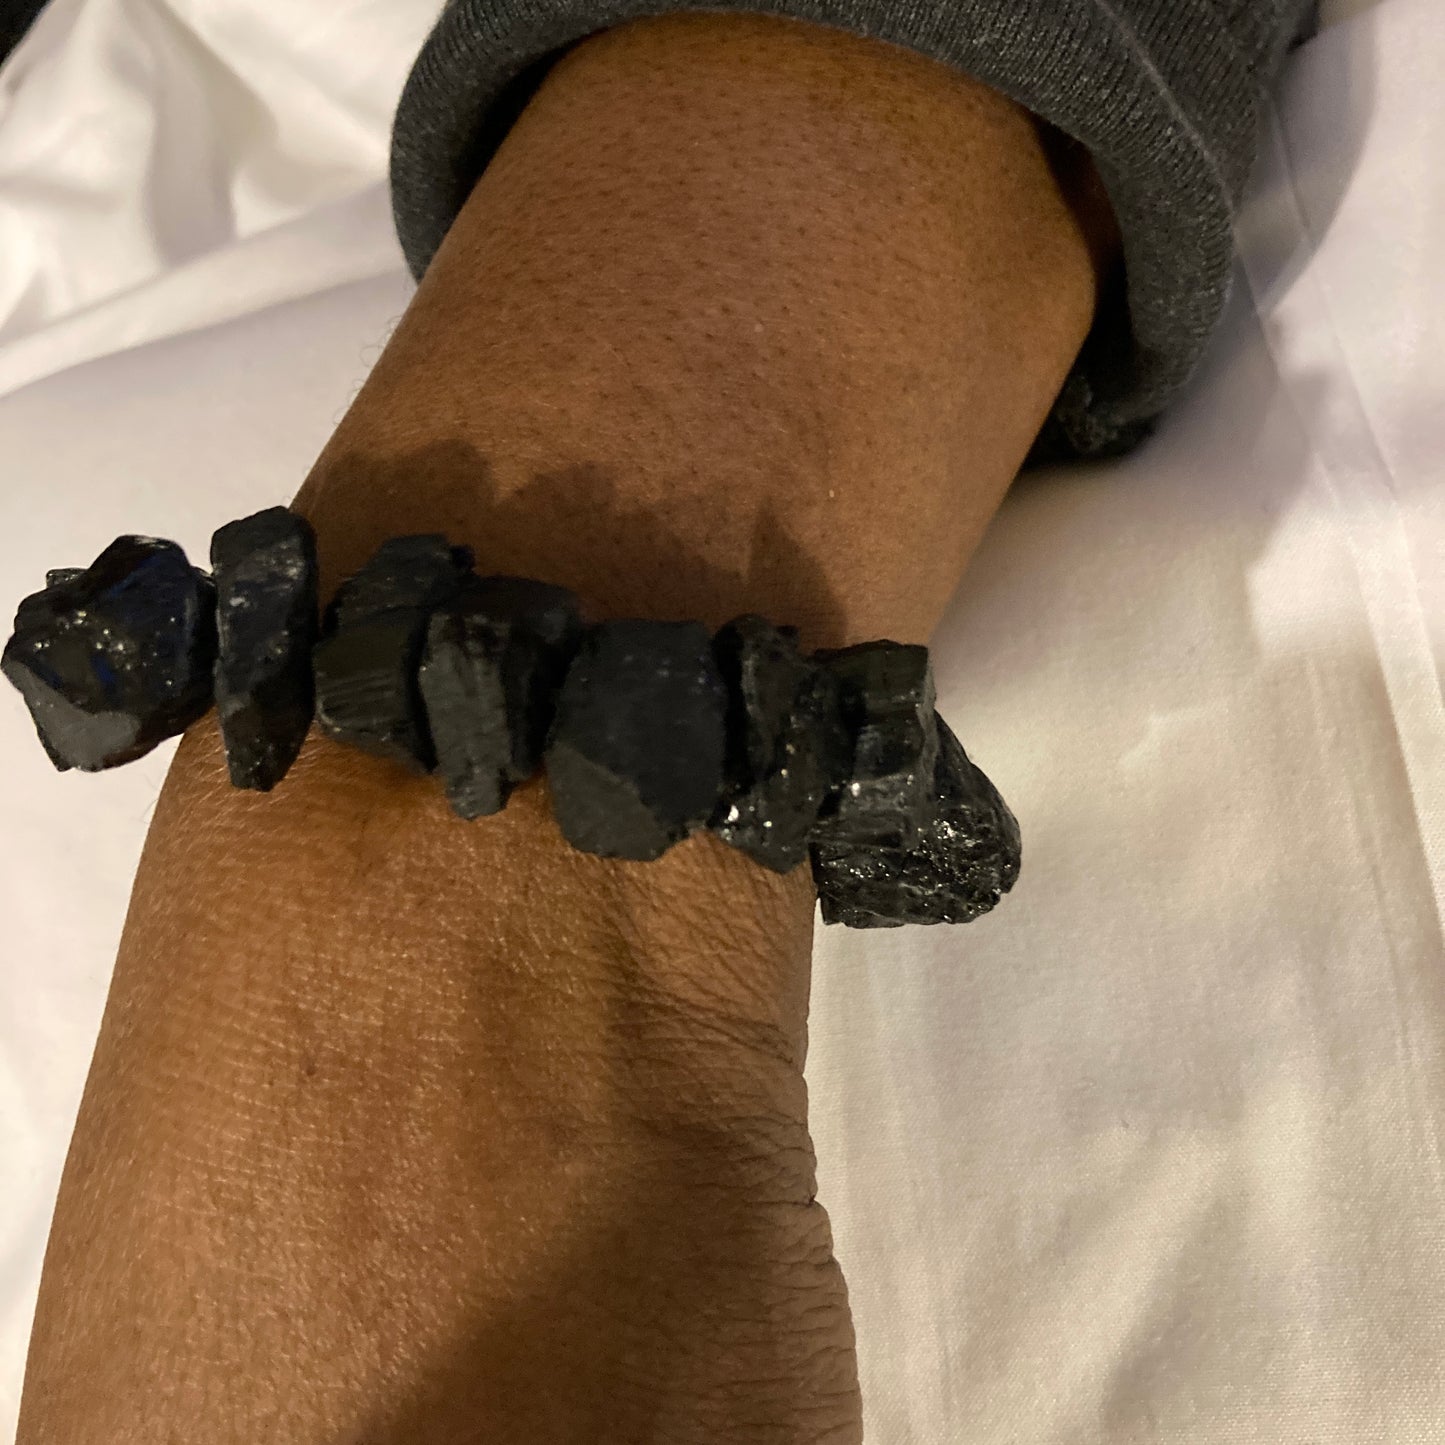 A handmade crystal bracelet of raw, natural,  black tourmaline chunks. This wristpeacemaker is a show stopper. 